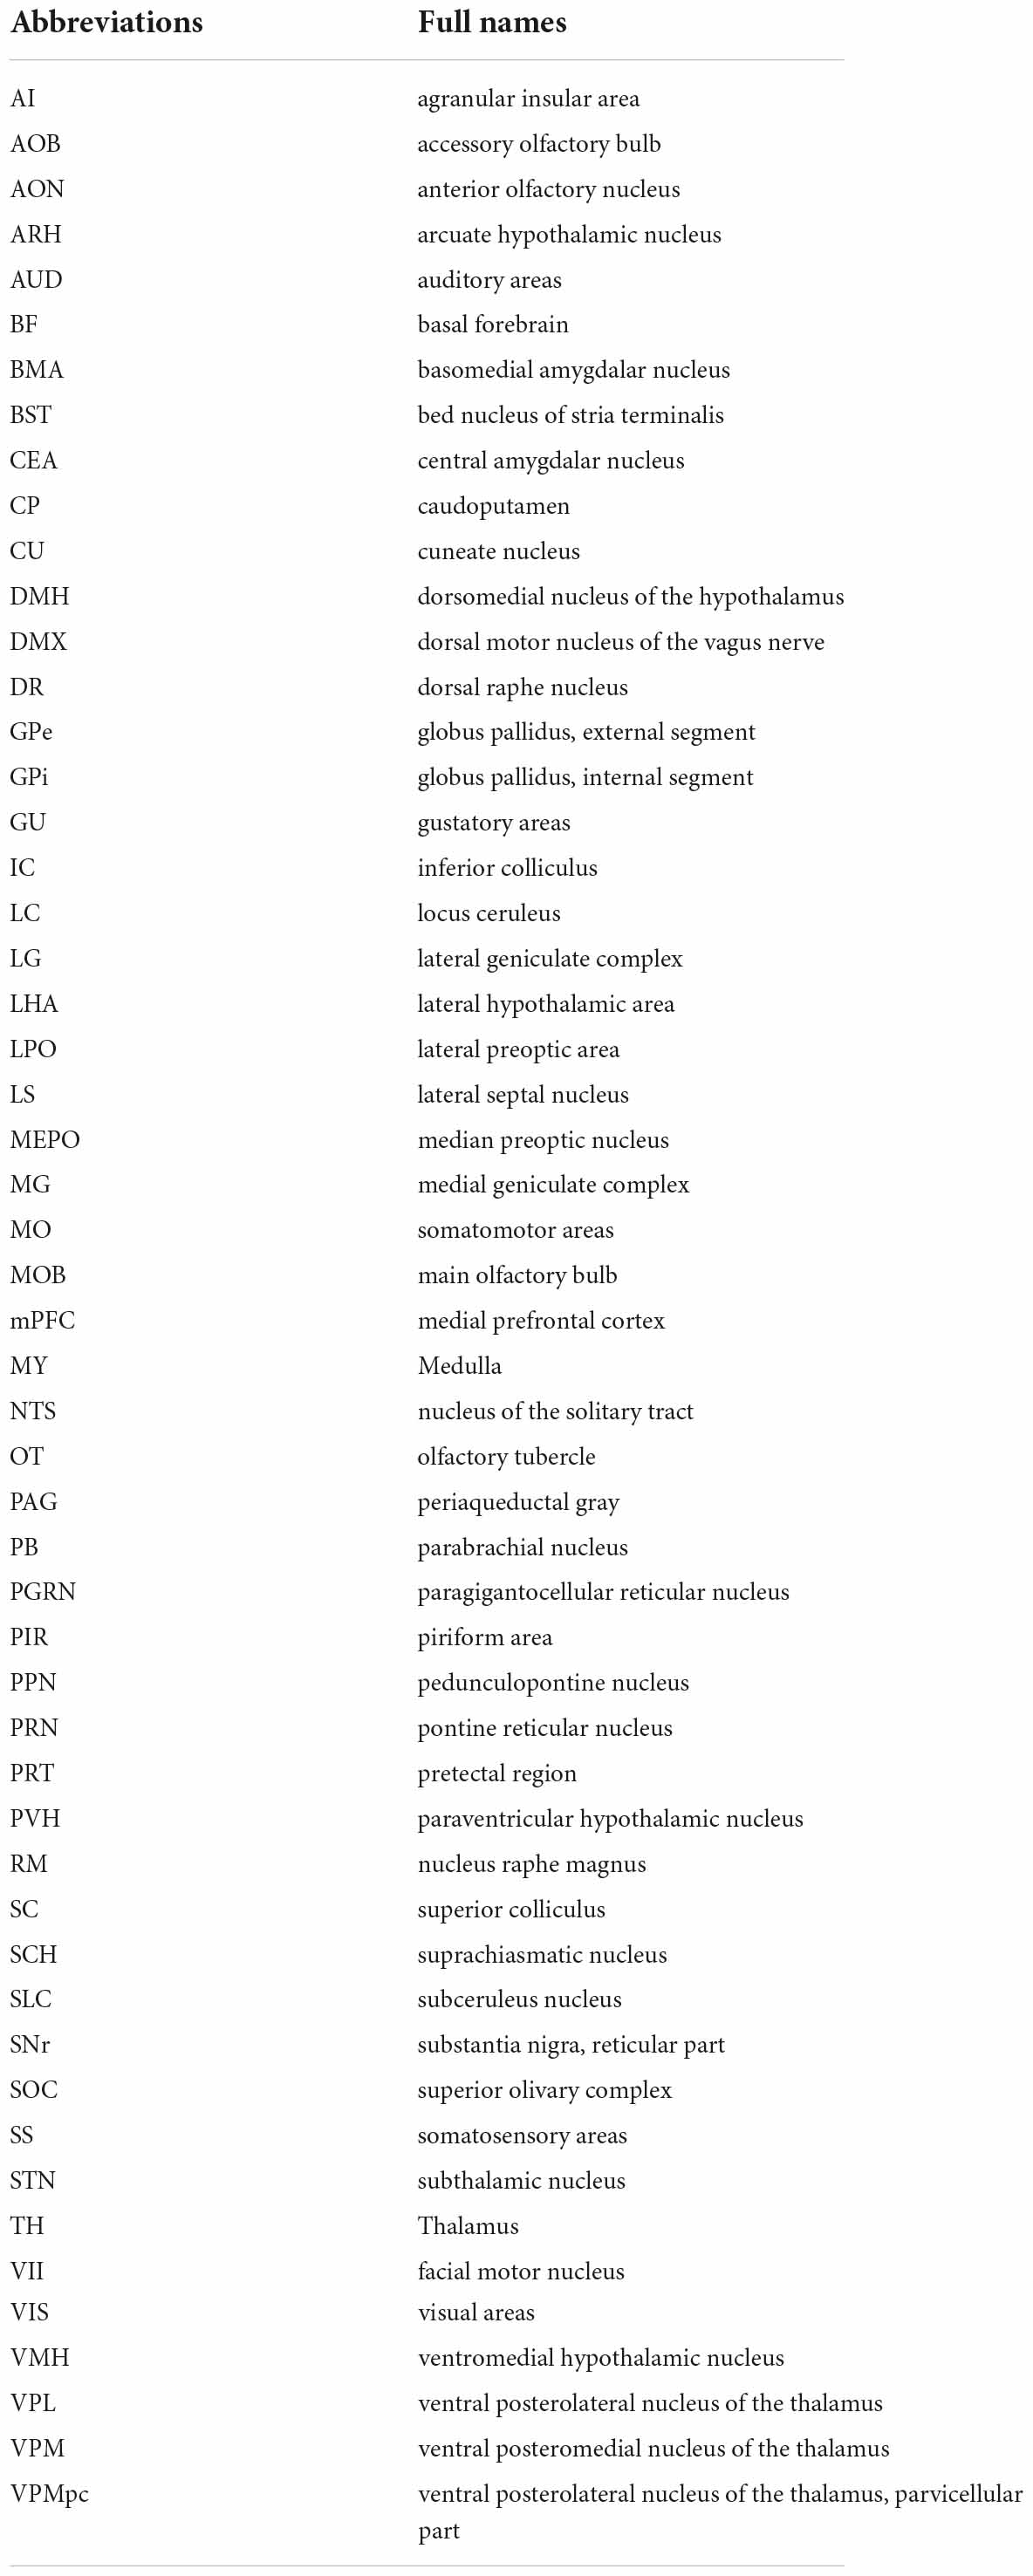 VPL Abbreviations, Full Forms, Meanings and Definitions